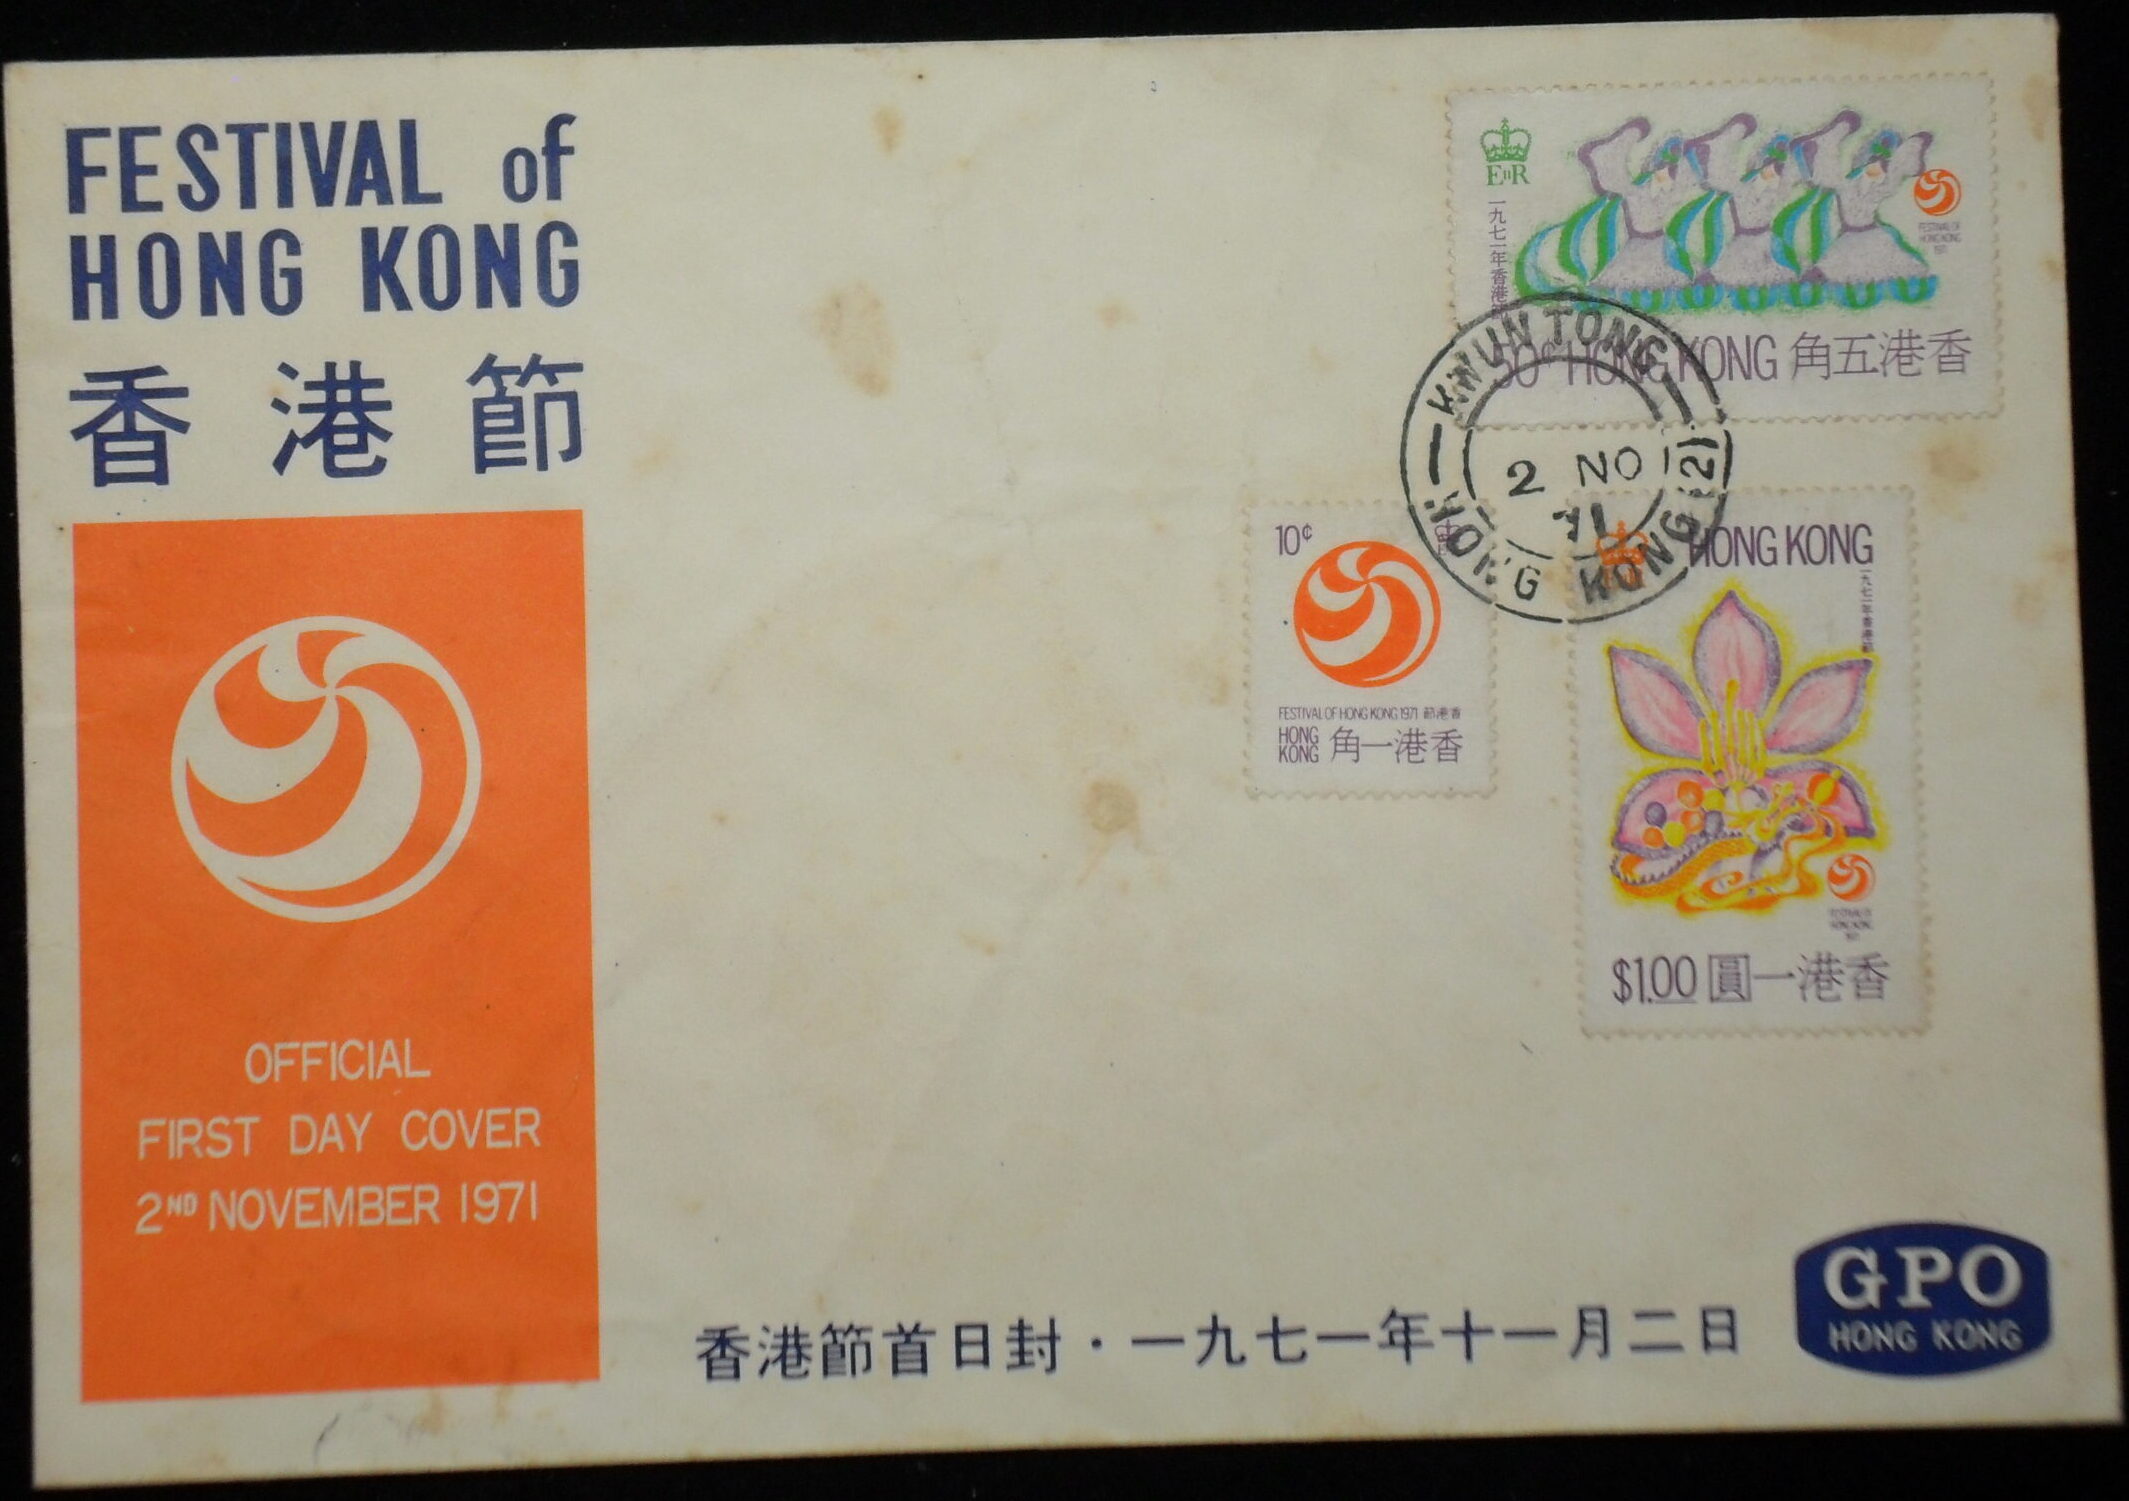 Auction for Stamp, Currency & Ticket etc. (郵票,錢幣及車票等拍賣 